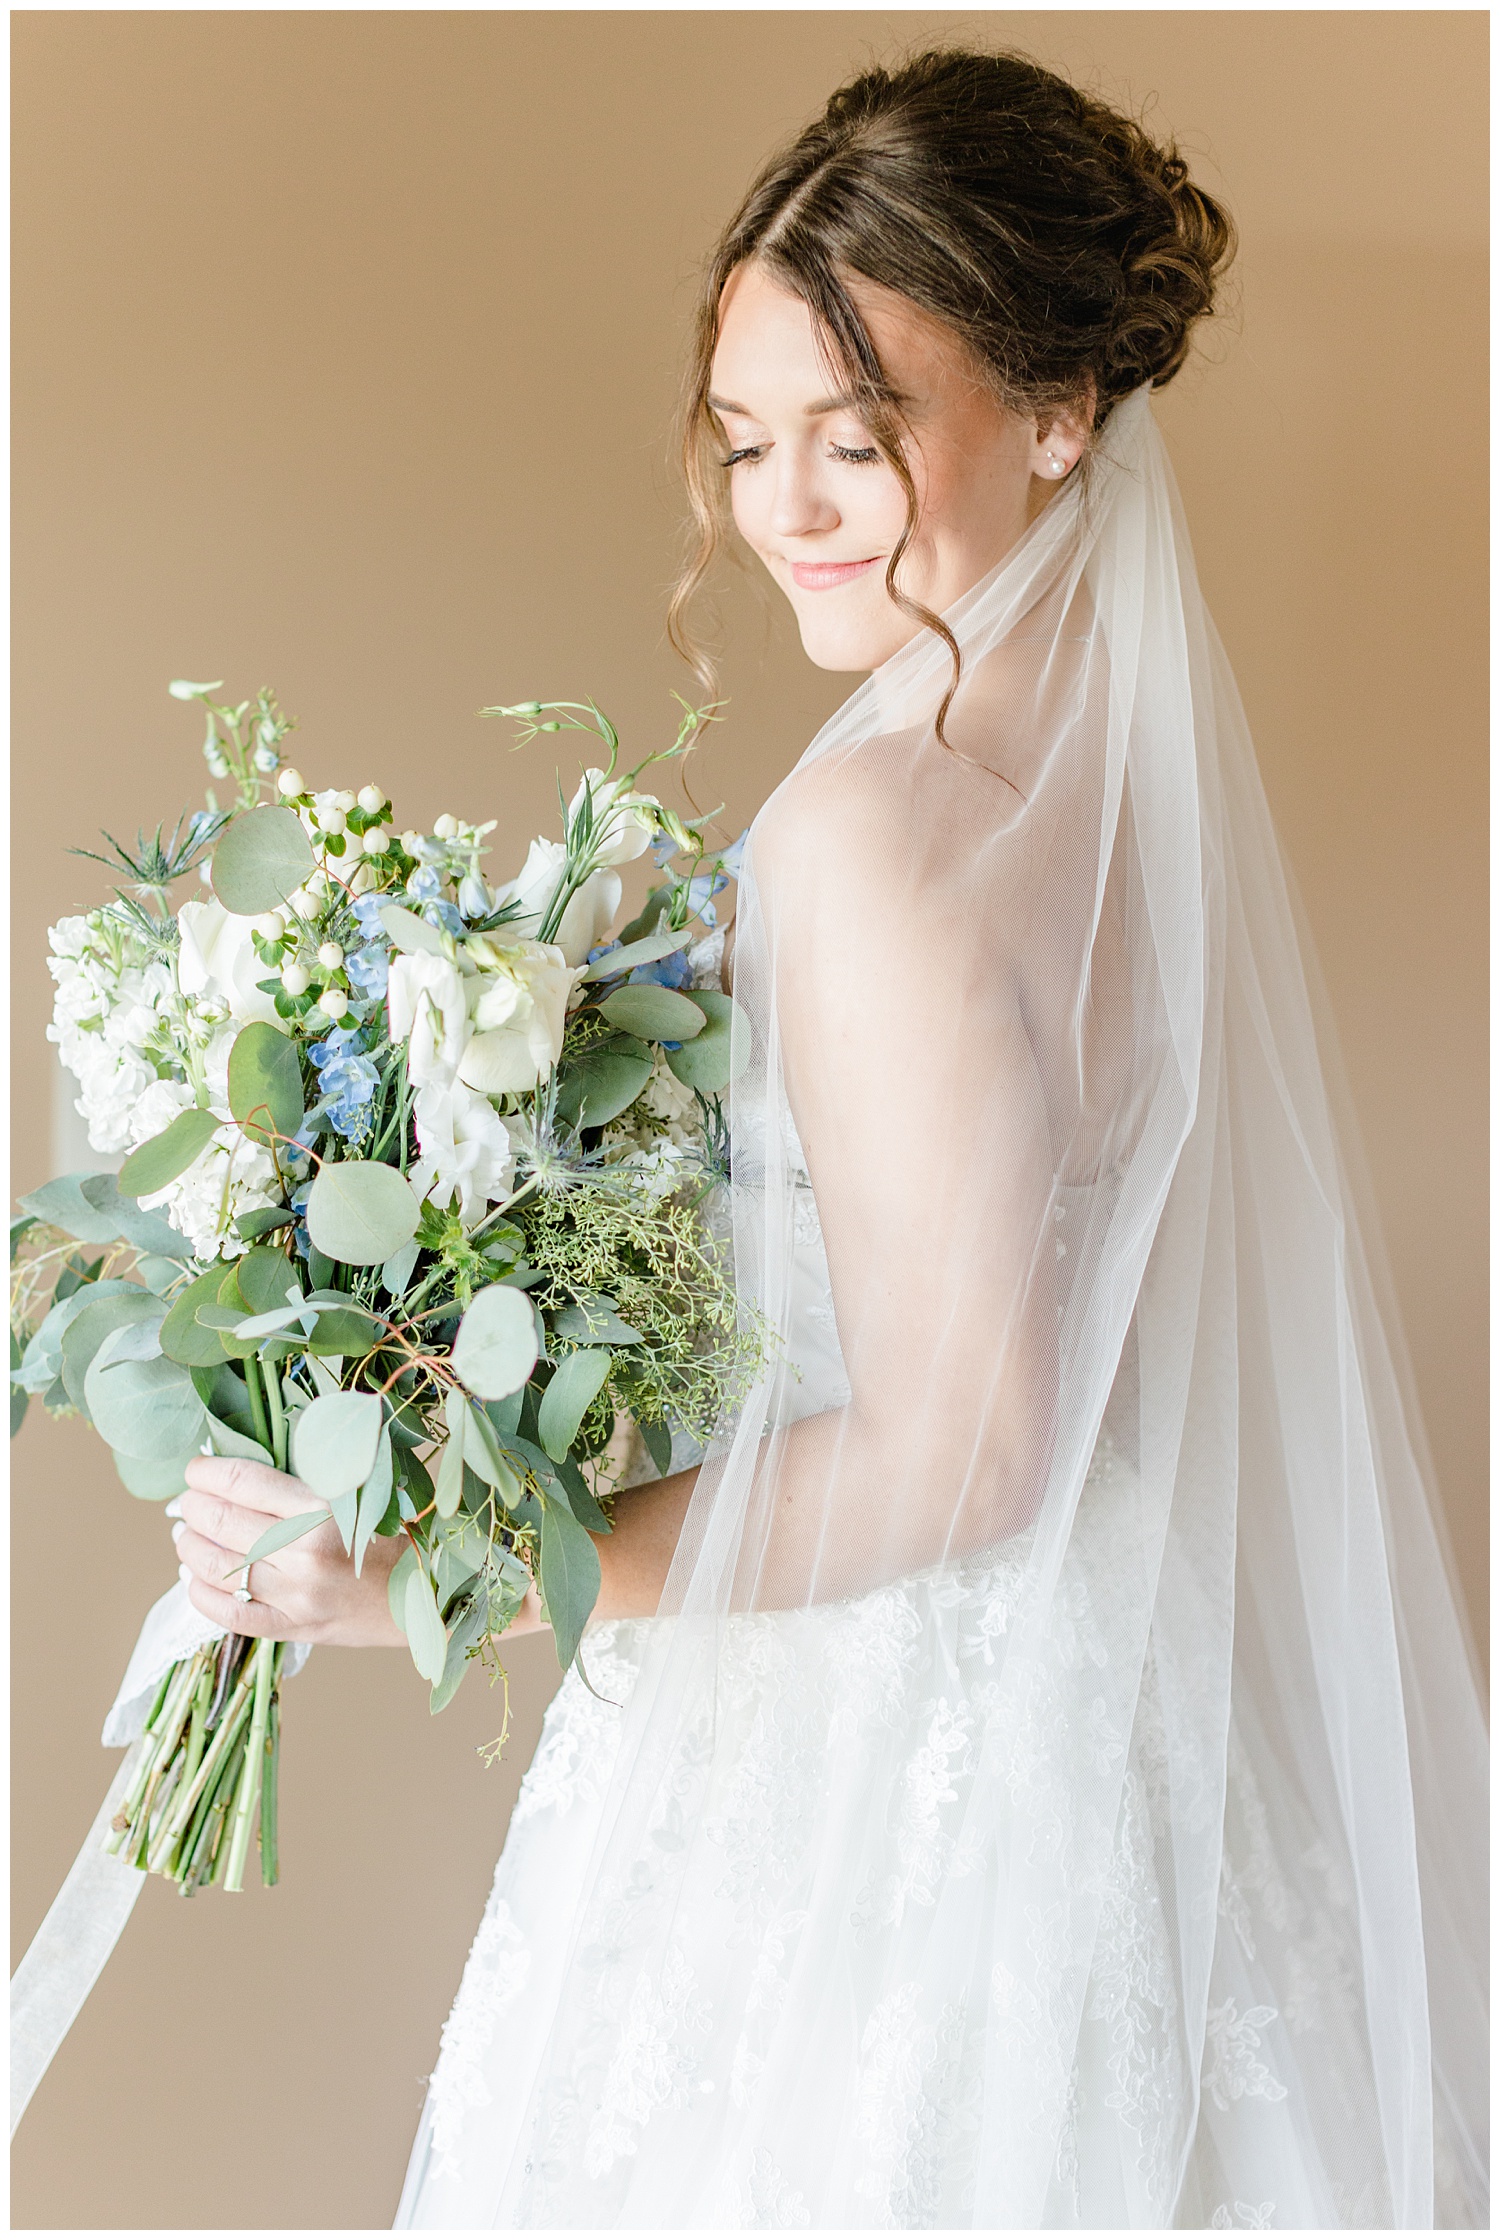 Bride Jenna wearing Sophia Tolli and holding her loose gathered bouquet of white roses, sea holly, and eucalyptus | CB Studio